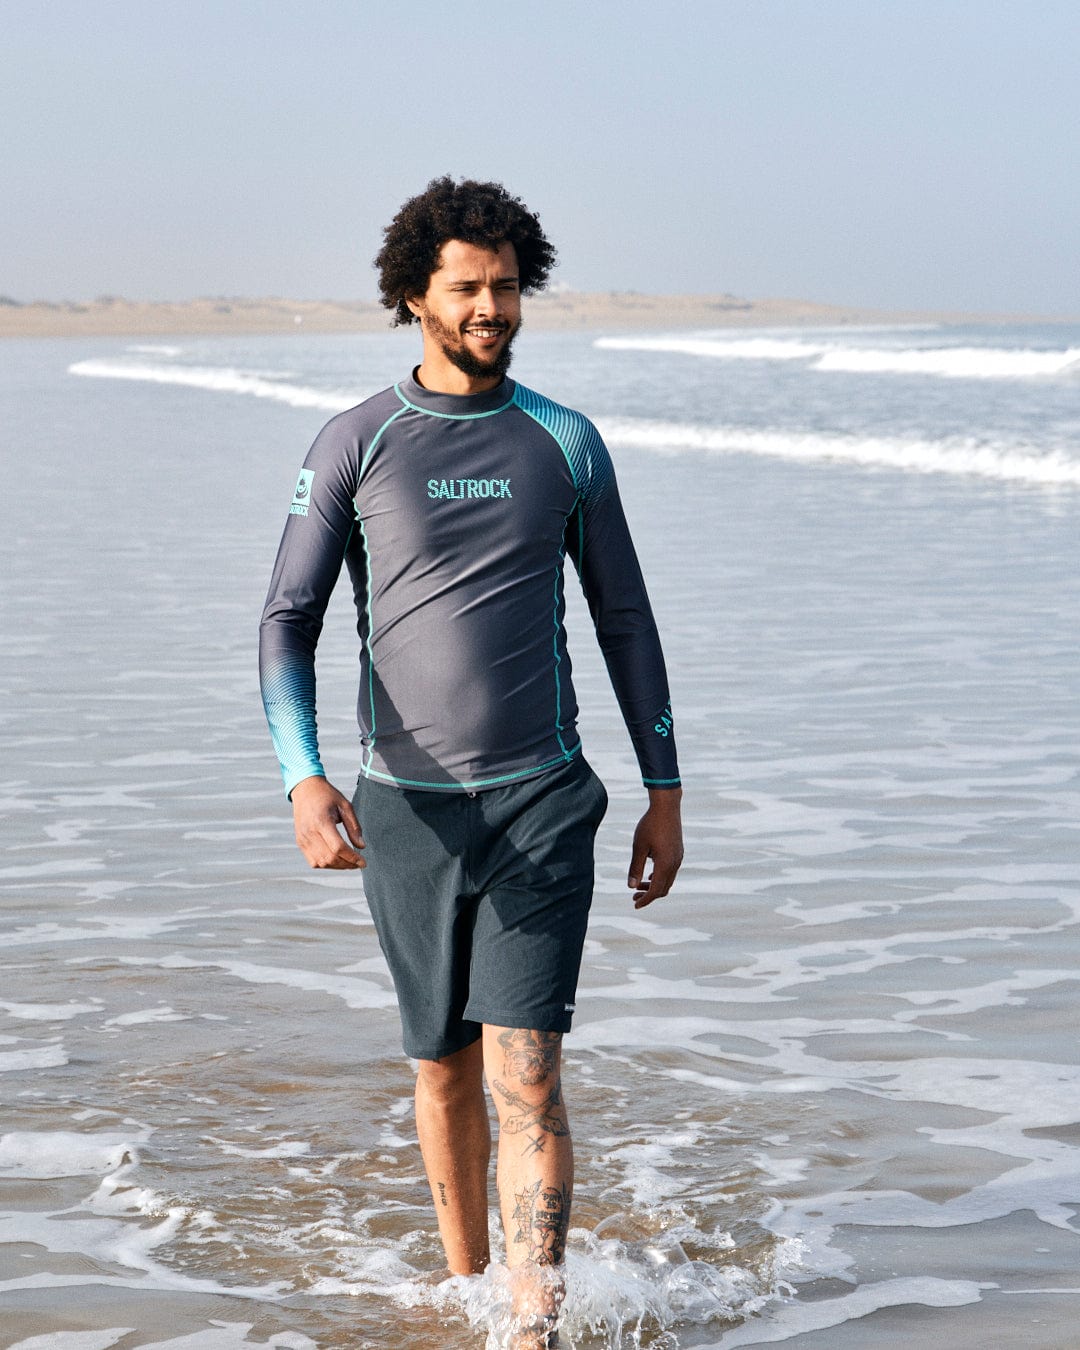 A man with curly hair wearing a Saltrock DNA Wave rash vest walks along a sandy beach with mild ocean waves at his feet.